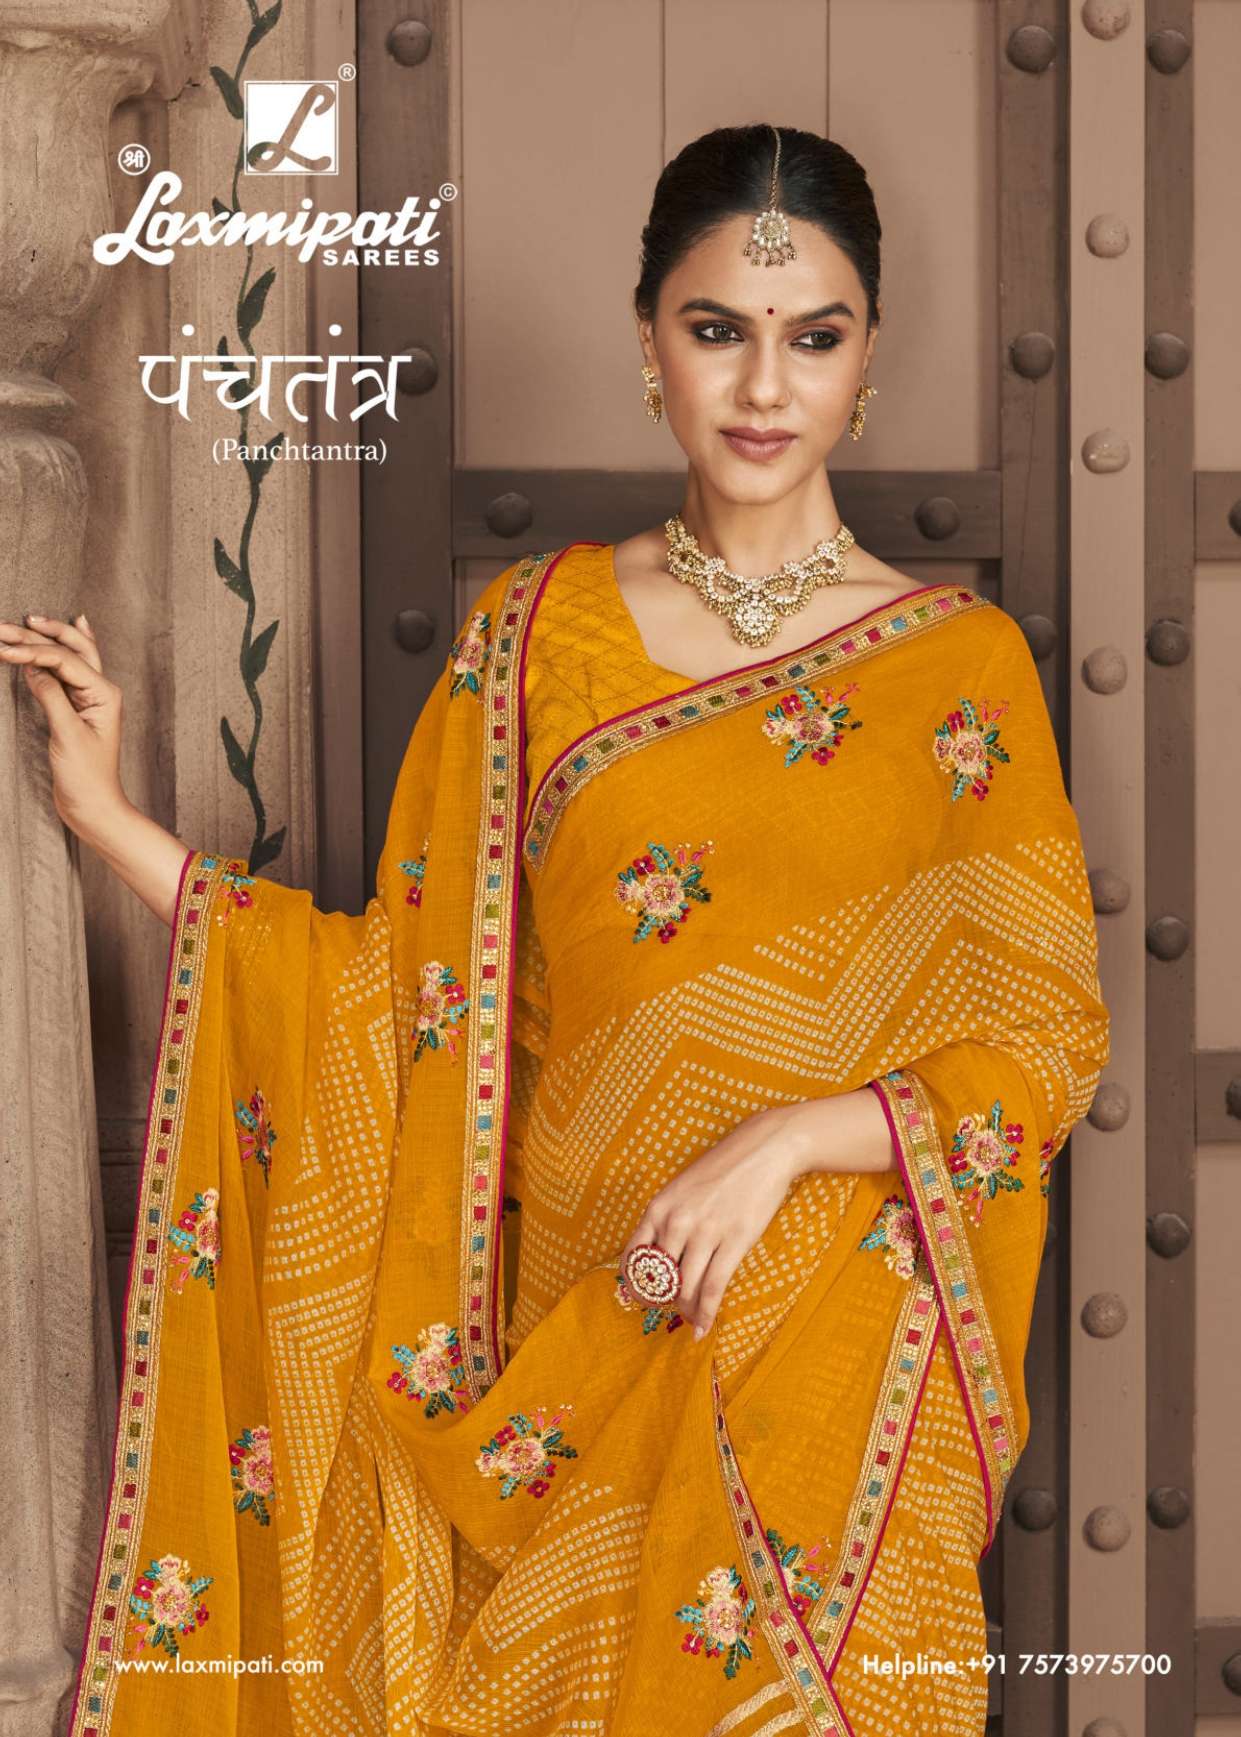 Designer Imarti Catalog Fancy Saree By Laxmipati Brand at Rs.1720/Catalogue  in surat offer by Laxmipati Sarees